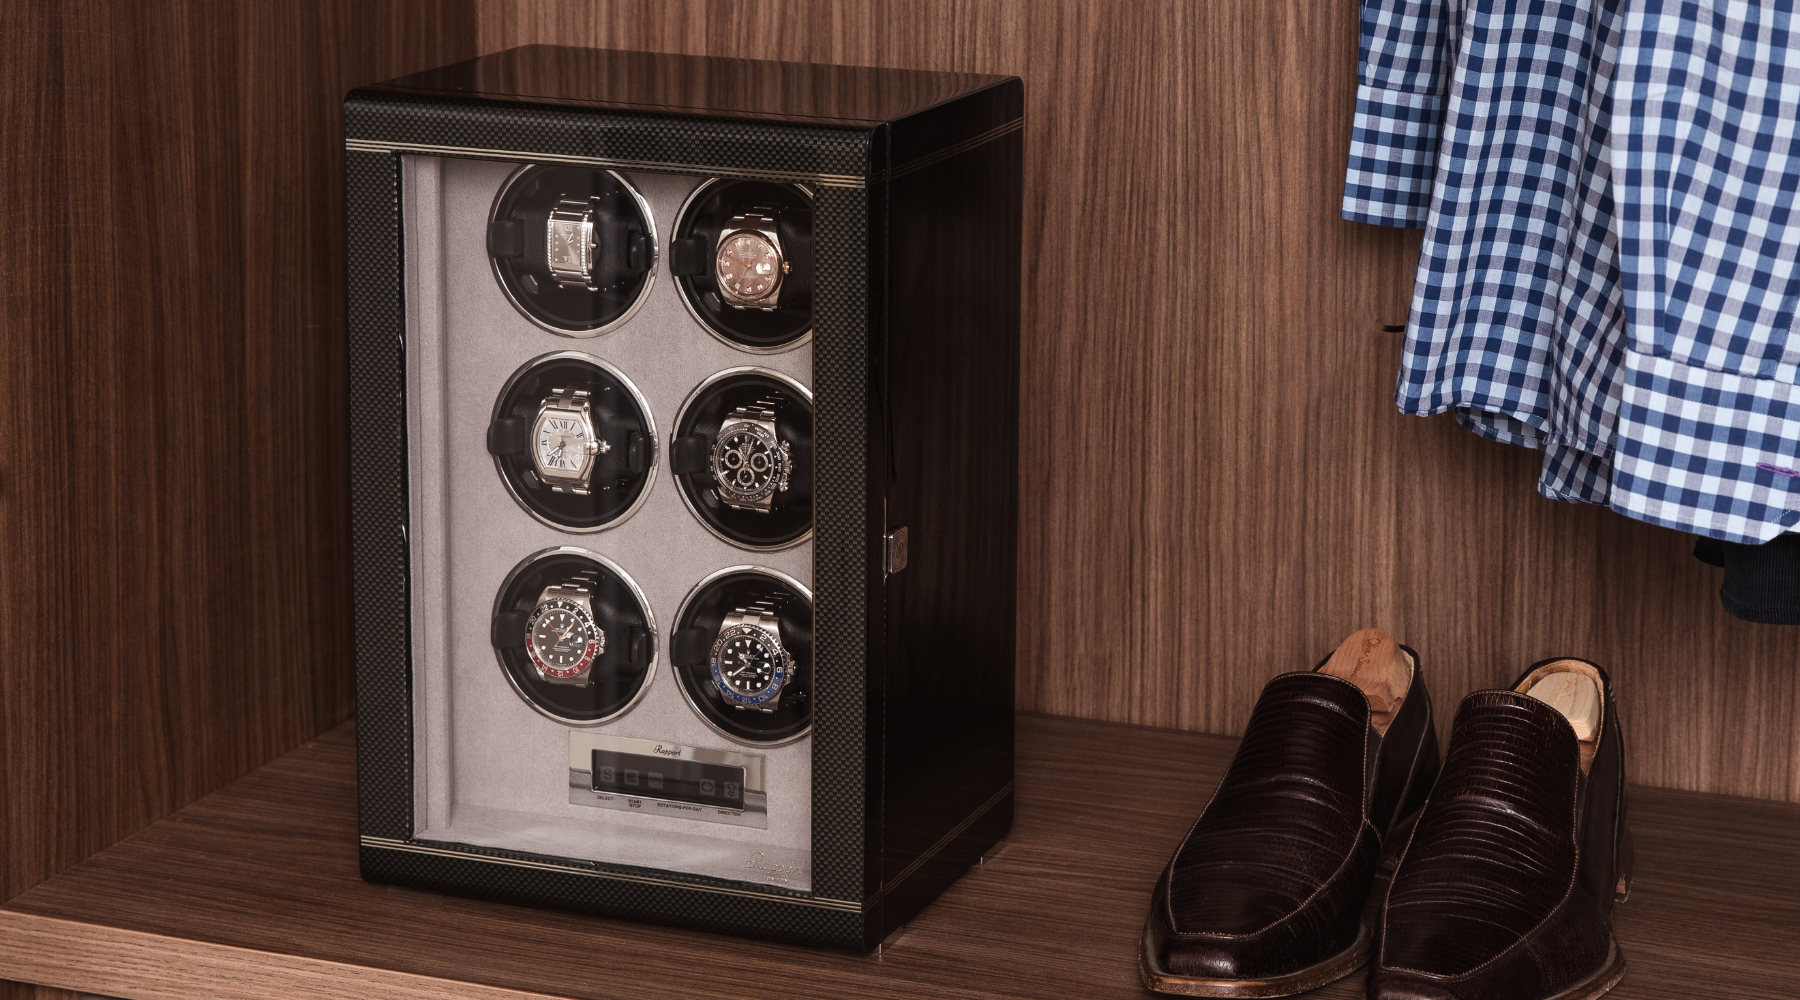 Article: Our Luxury Cabinet Watch Winders